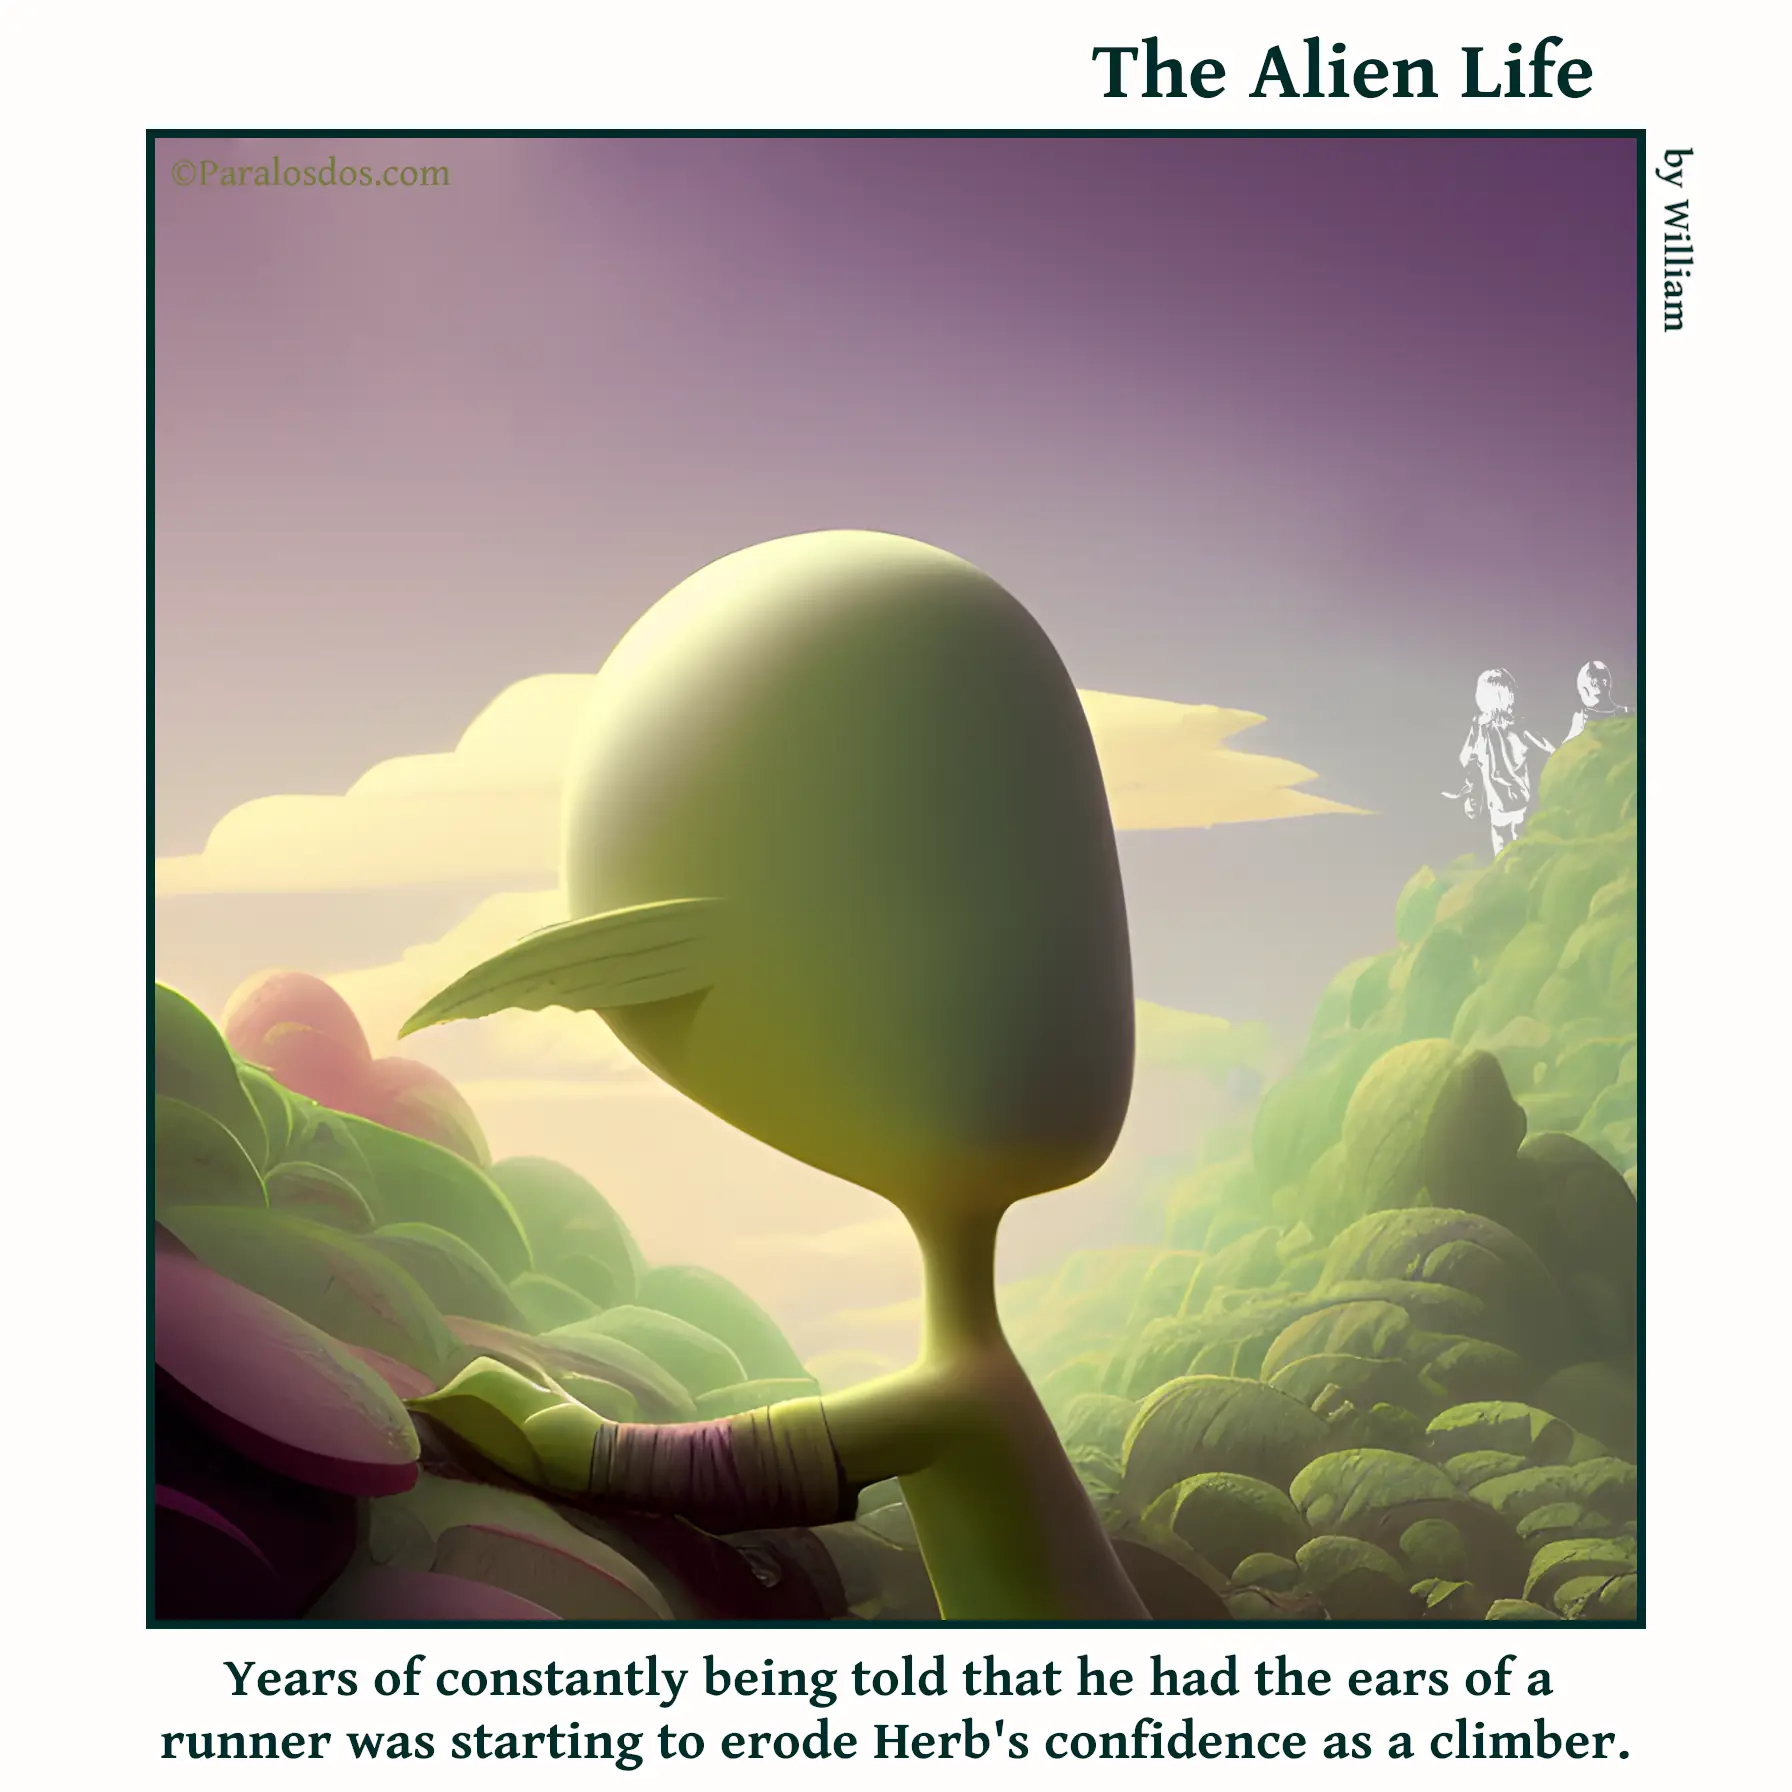 The Alien Life, one panel Comic. An alien with ears that look like lightening bolts is climbing a mountain. The caption reads: Years of constantly being told that he had the ears of a runner was starting to erode Herb's confidence as a climber.